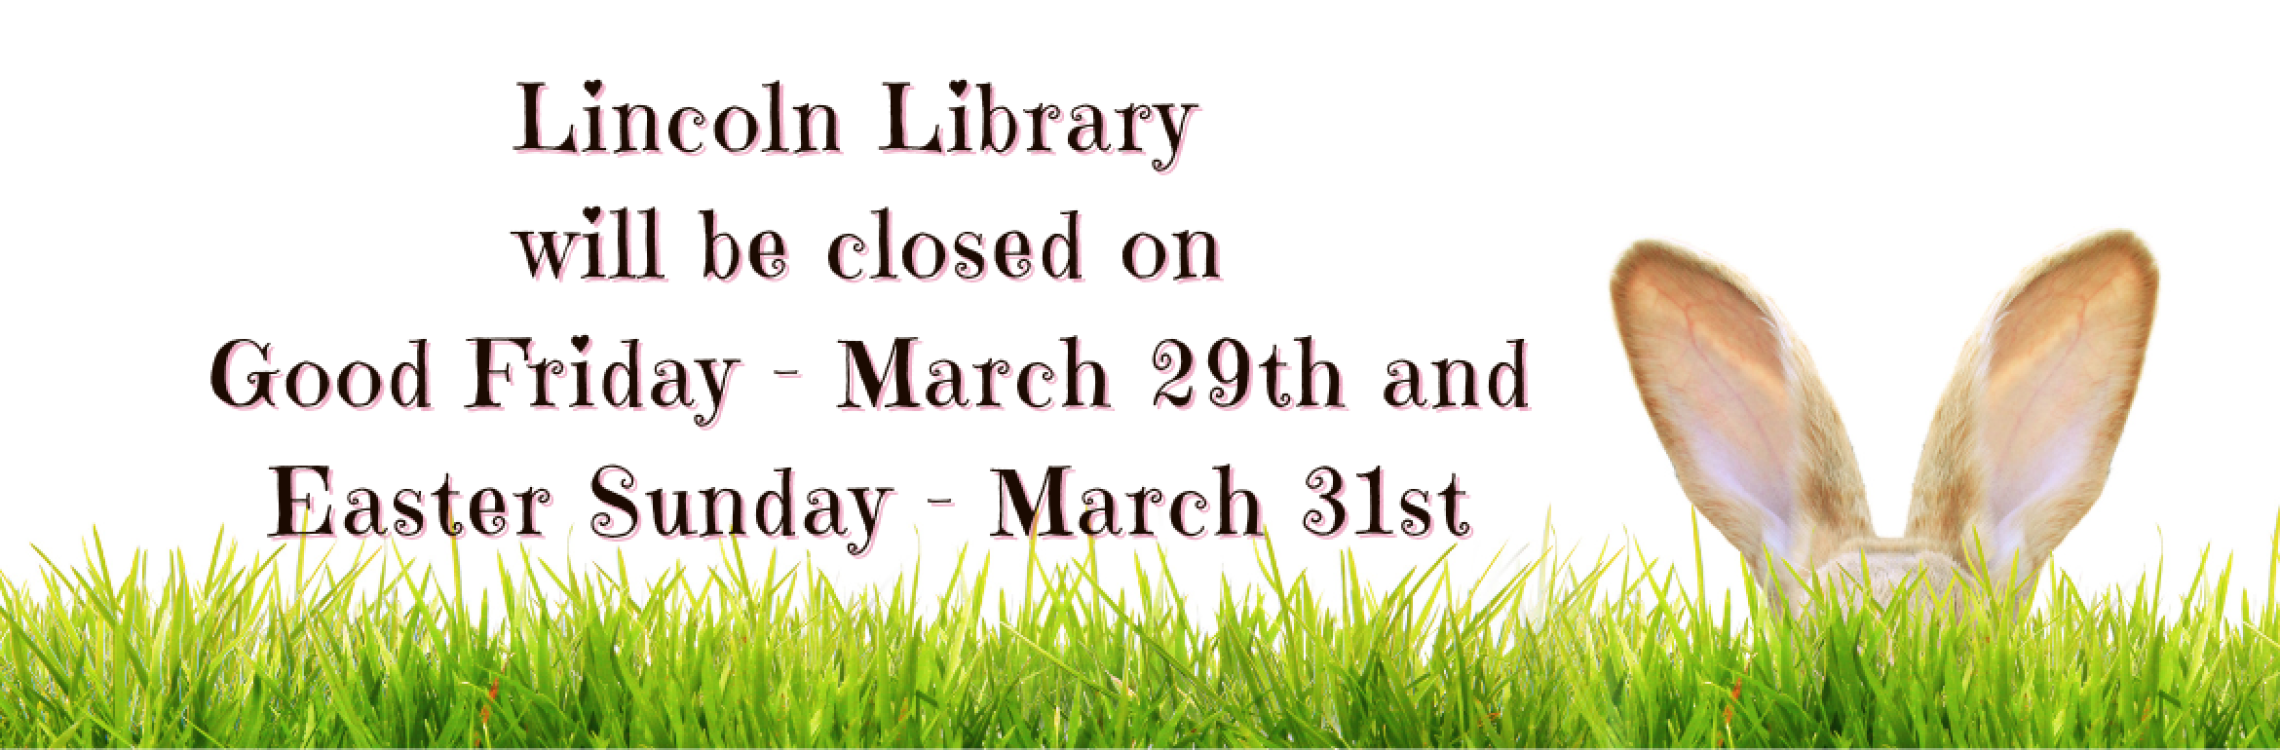 Lincoln Library will be closed on Friday, March 29th and Sunday, March 31st for Good Friday and Easter Sunday